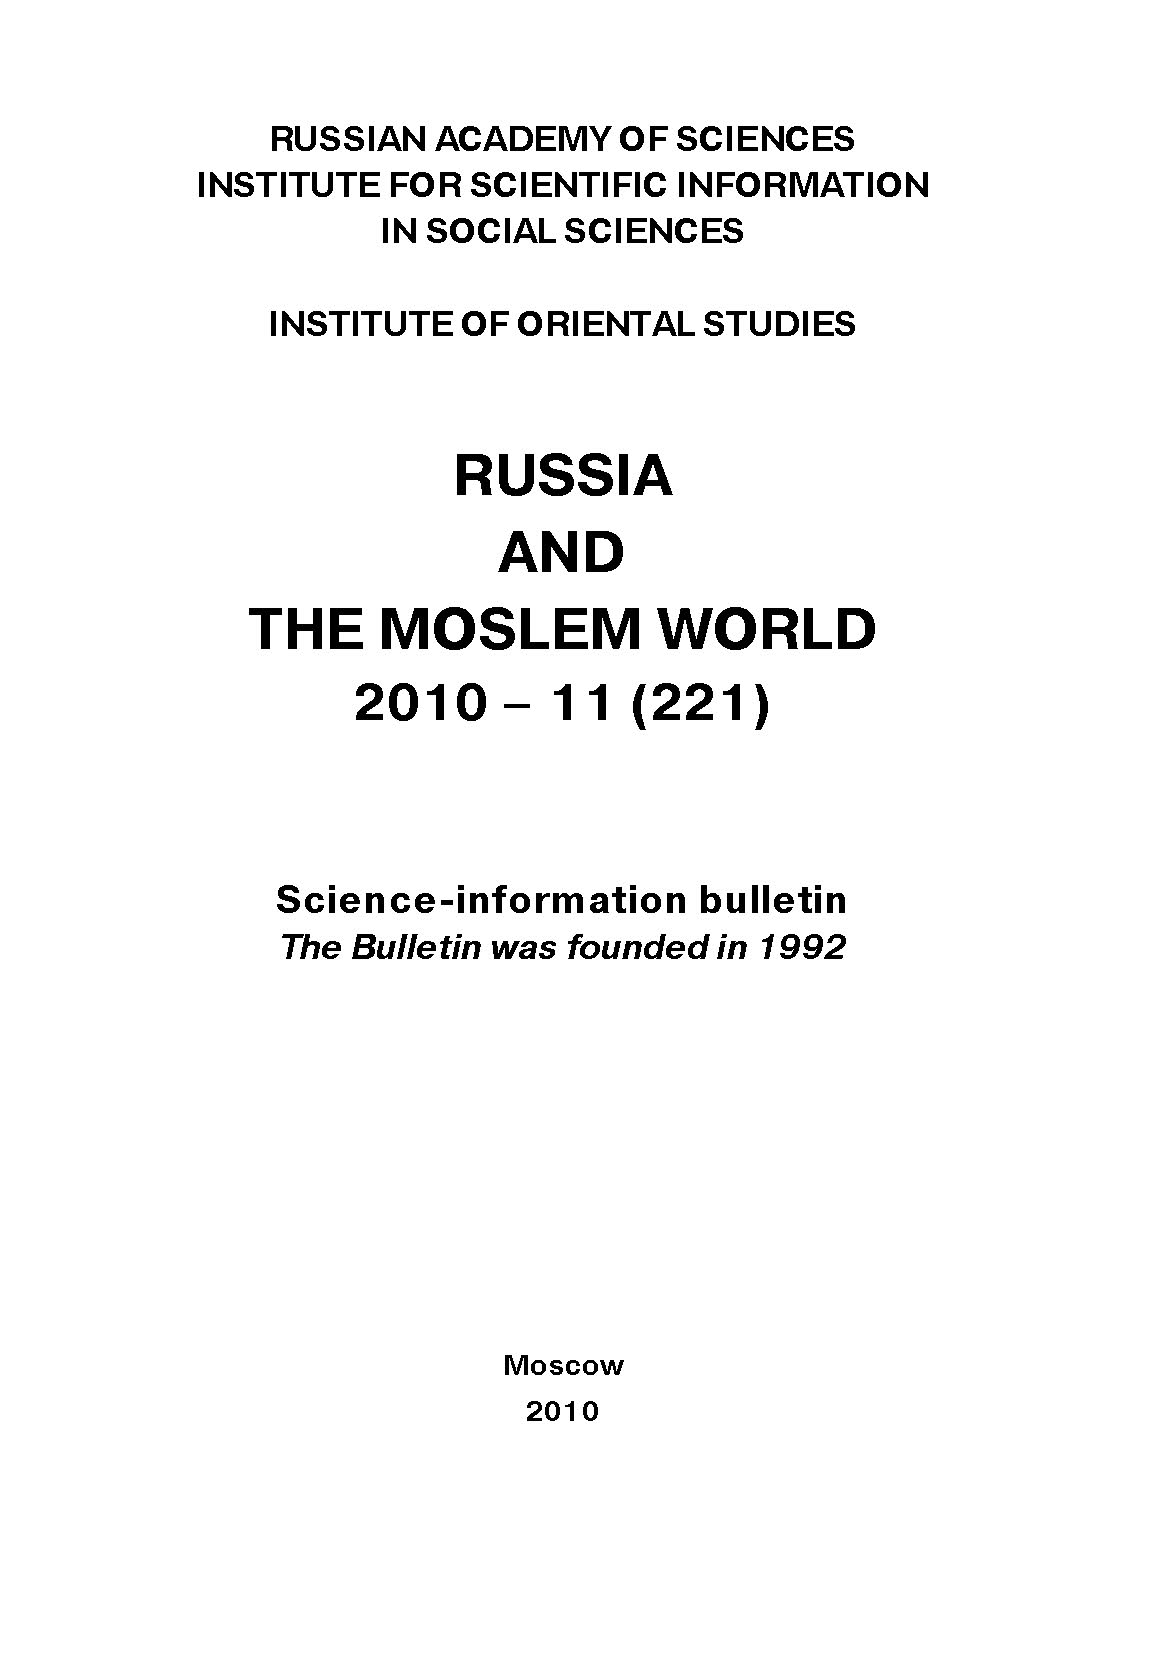 Russia and the Moslem World№ 11 / 2010